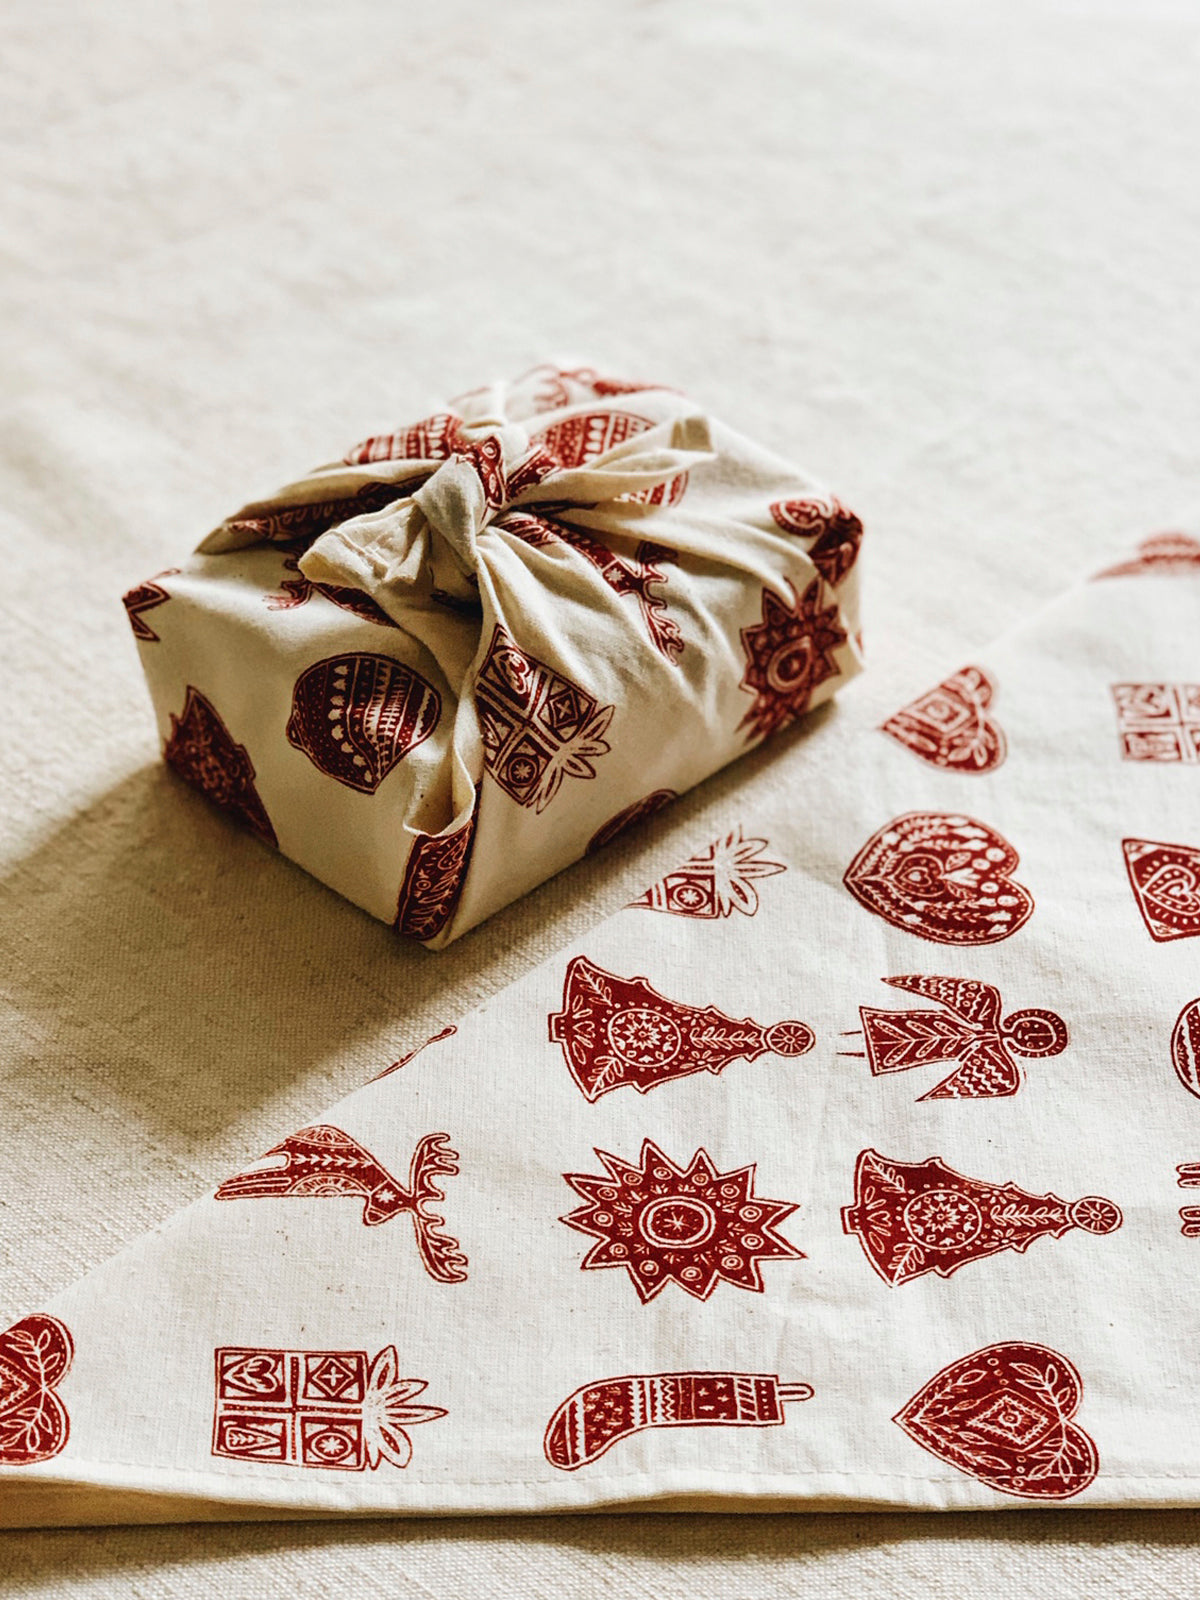 Wrapping cloth / napkin with Christmas pattern